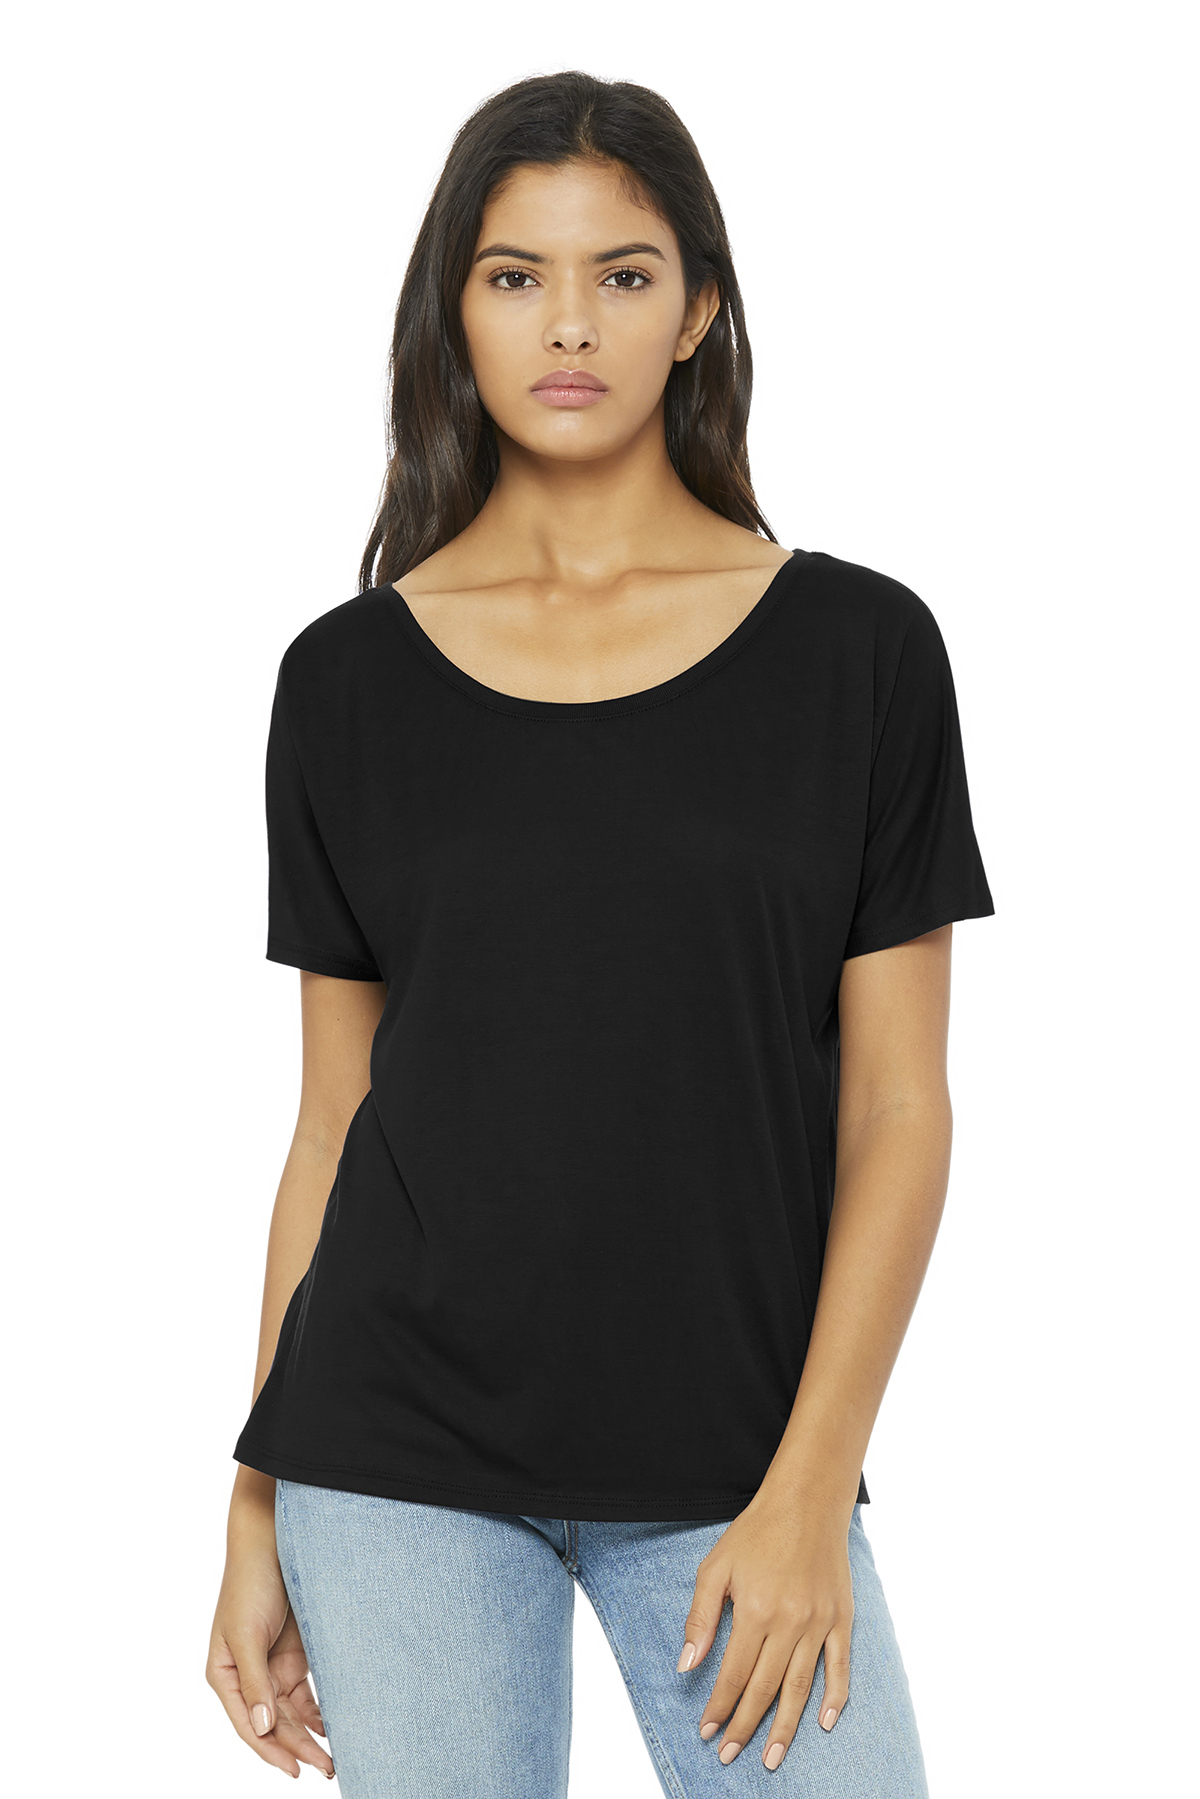 BELLA+CANVAS Women’s Slouchy Tee | Product | Company Casuals